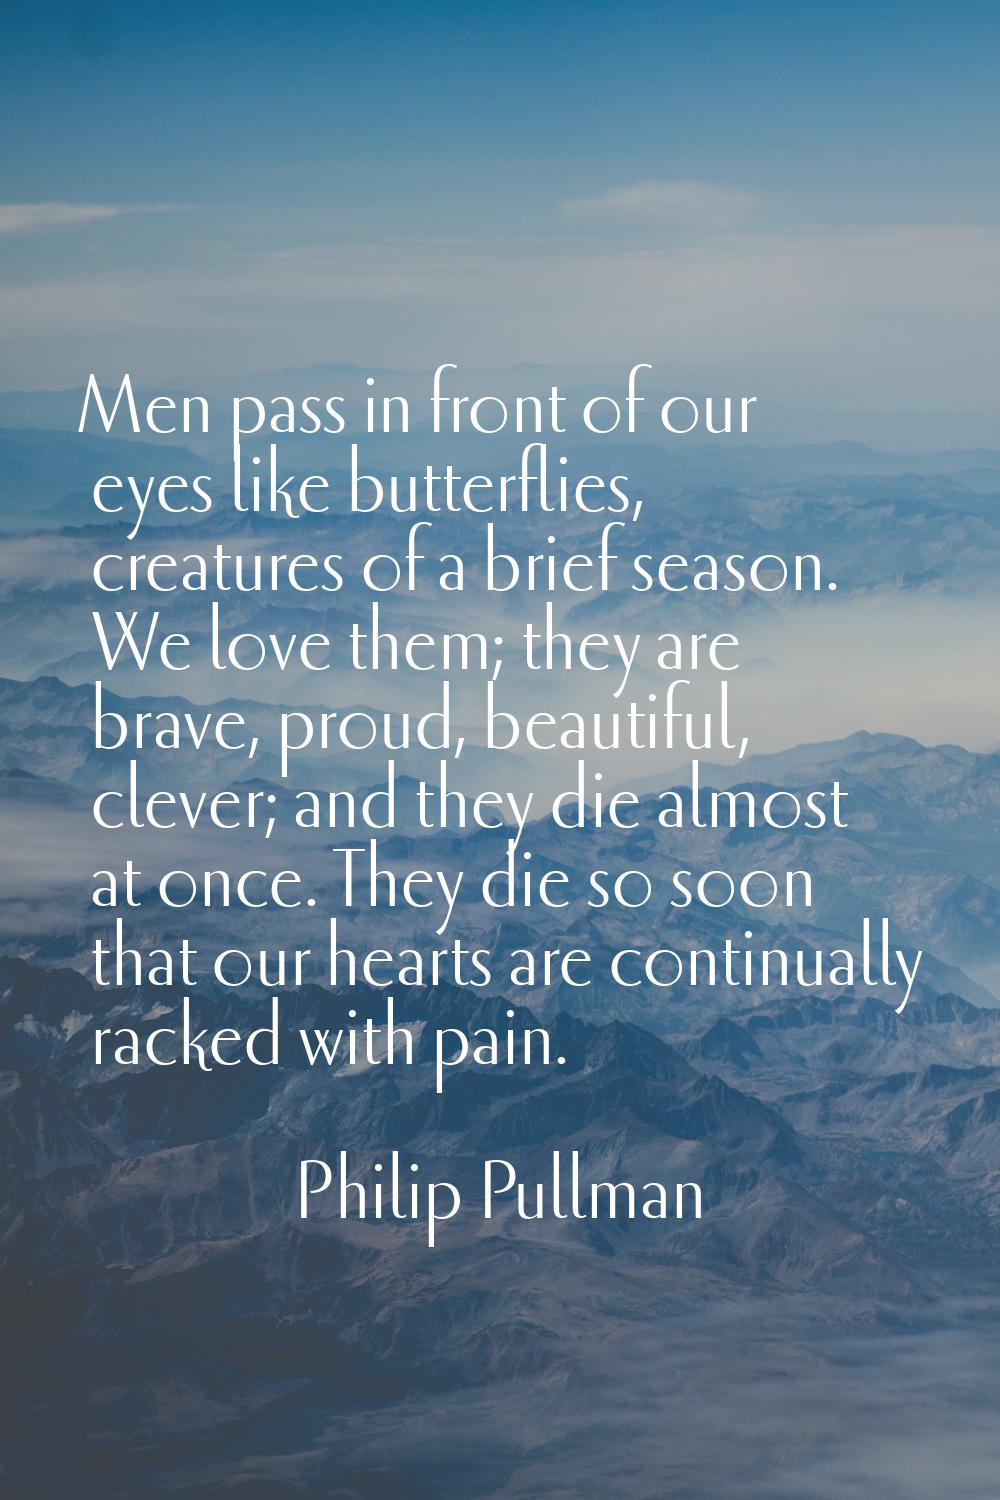 Men pass in front of our eyes like butterflies, creatures of a brief season. We love them; they are